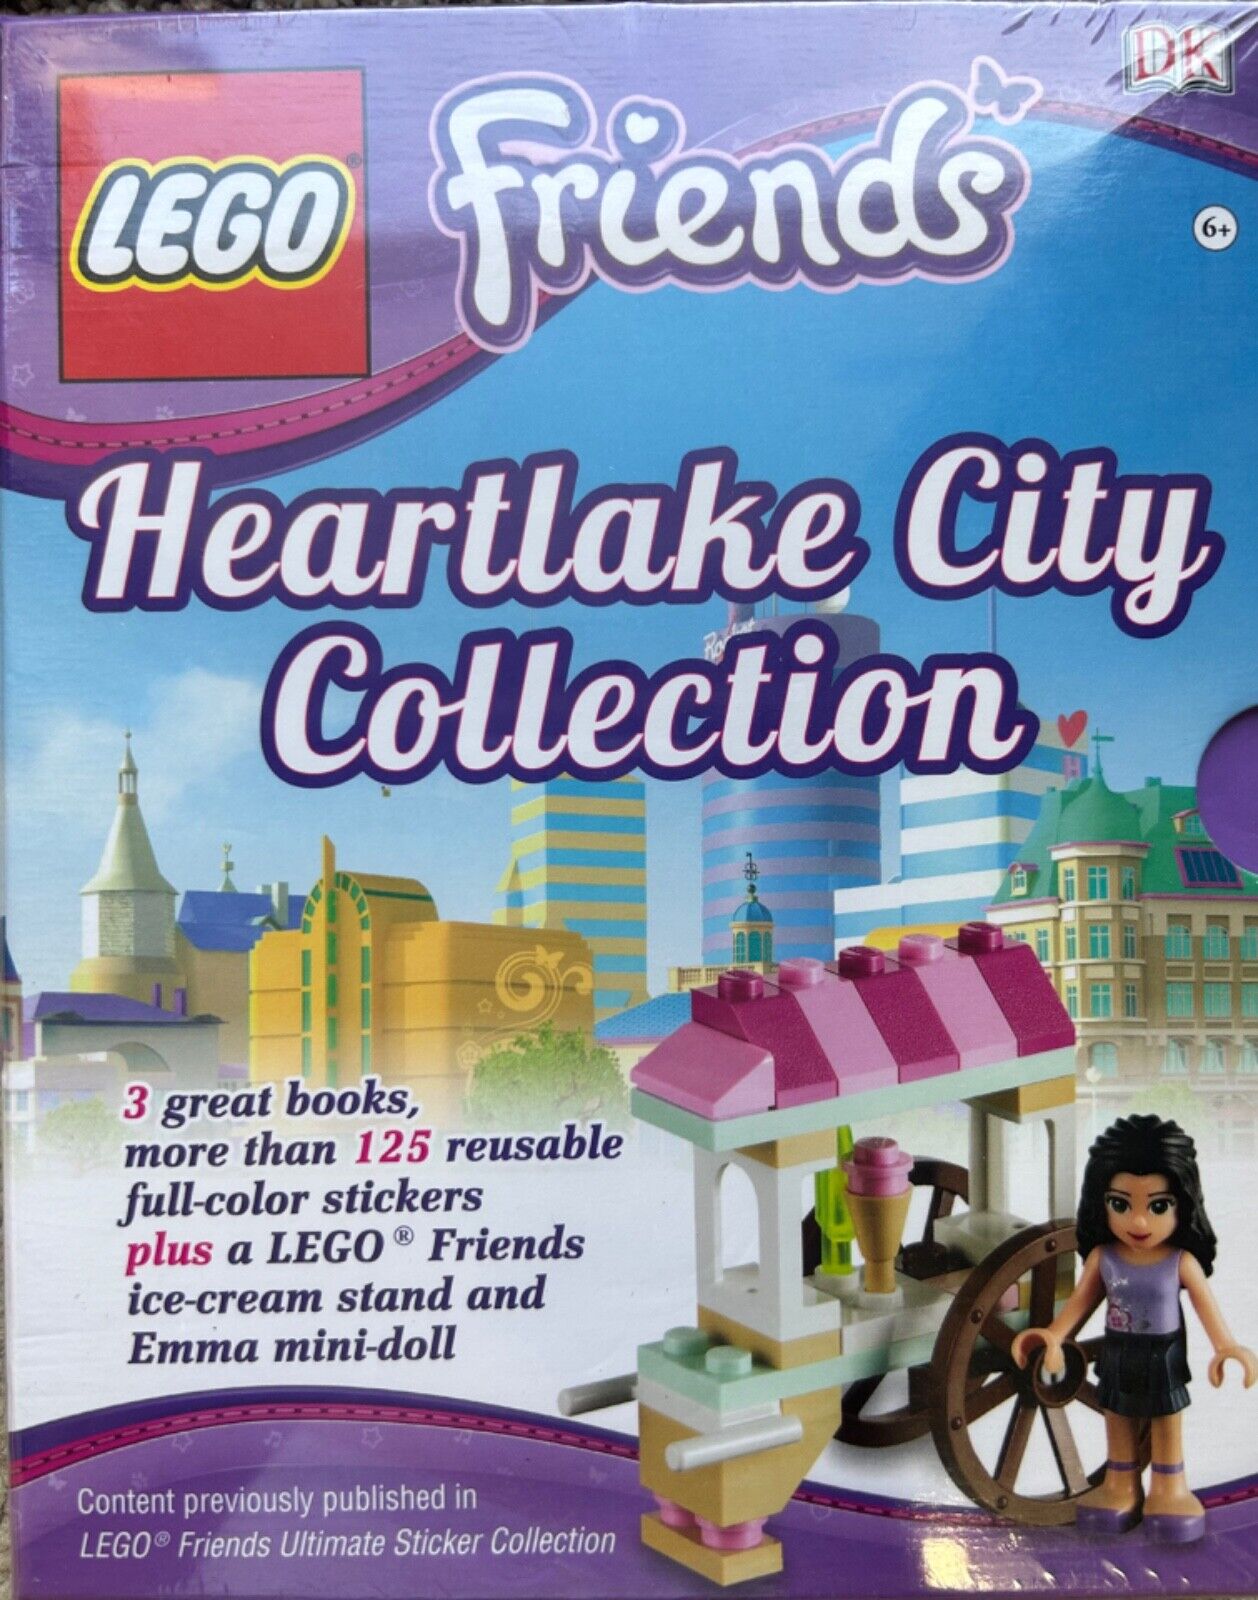 Lego Friends Heartlake City Collection with 3 books, ice cream stand and Emma 